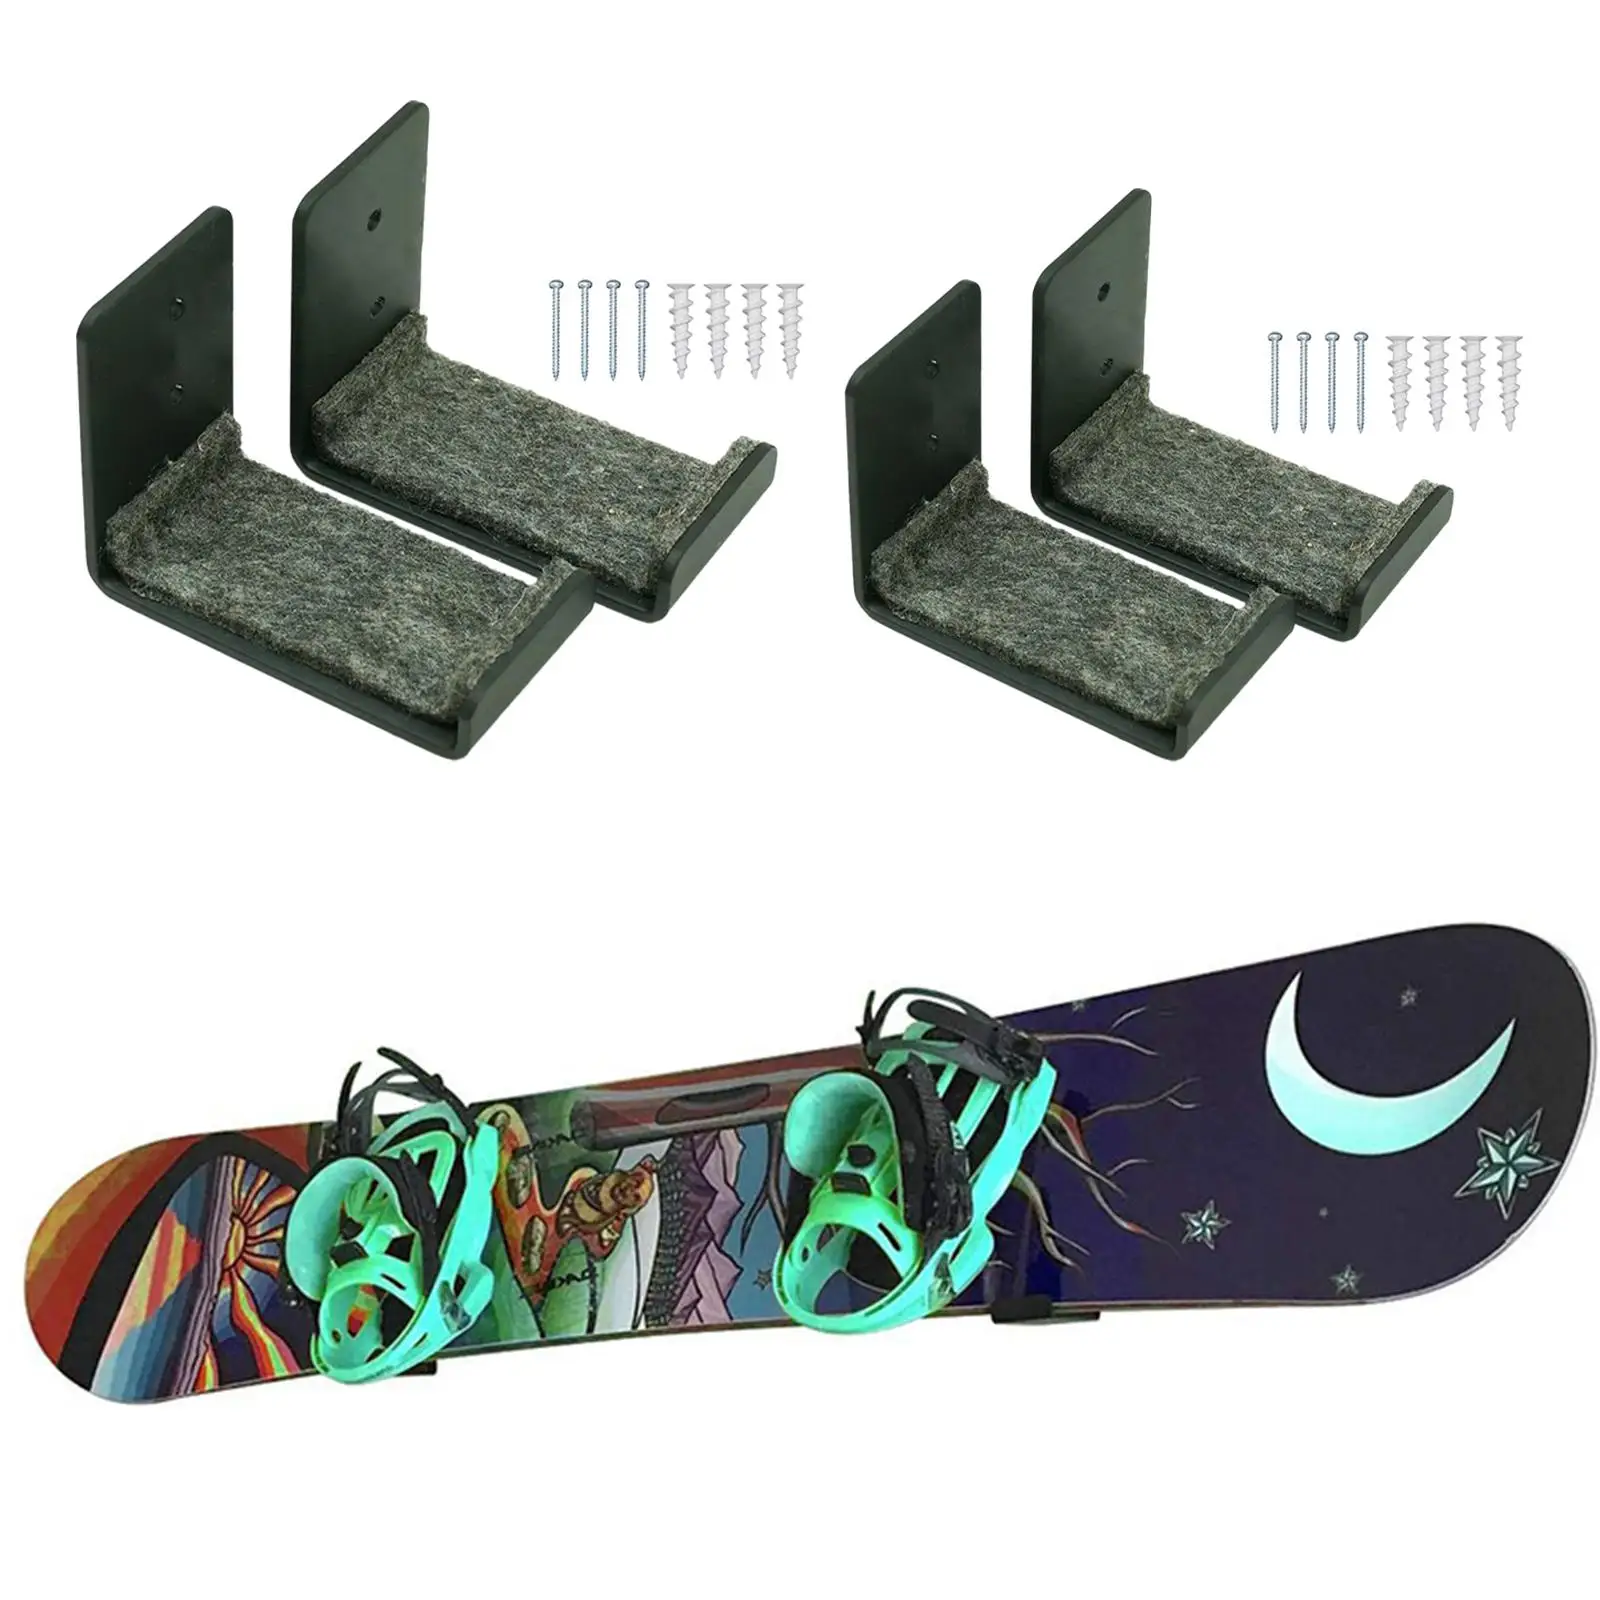 Surfboard Wall Rack Wall Mounted Parts Multifunctional Durable Organizer Snowboard Rack Display for Home Indoor Skis Snowboard